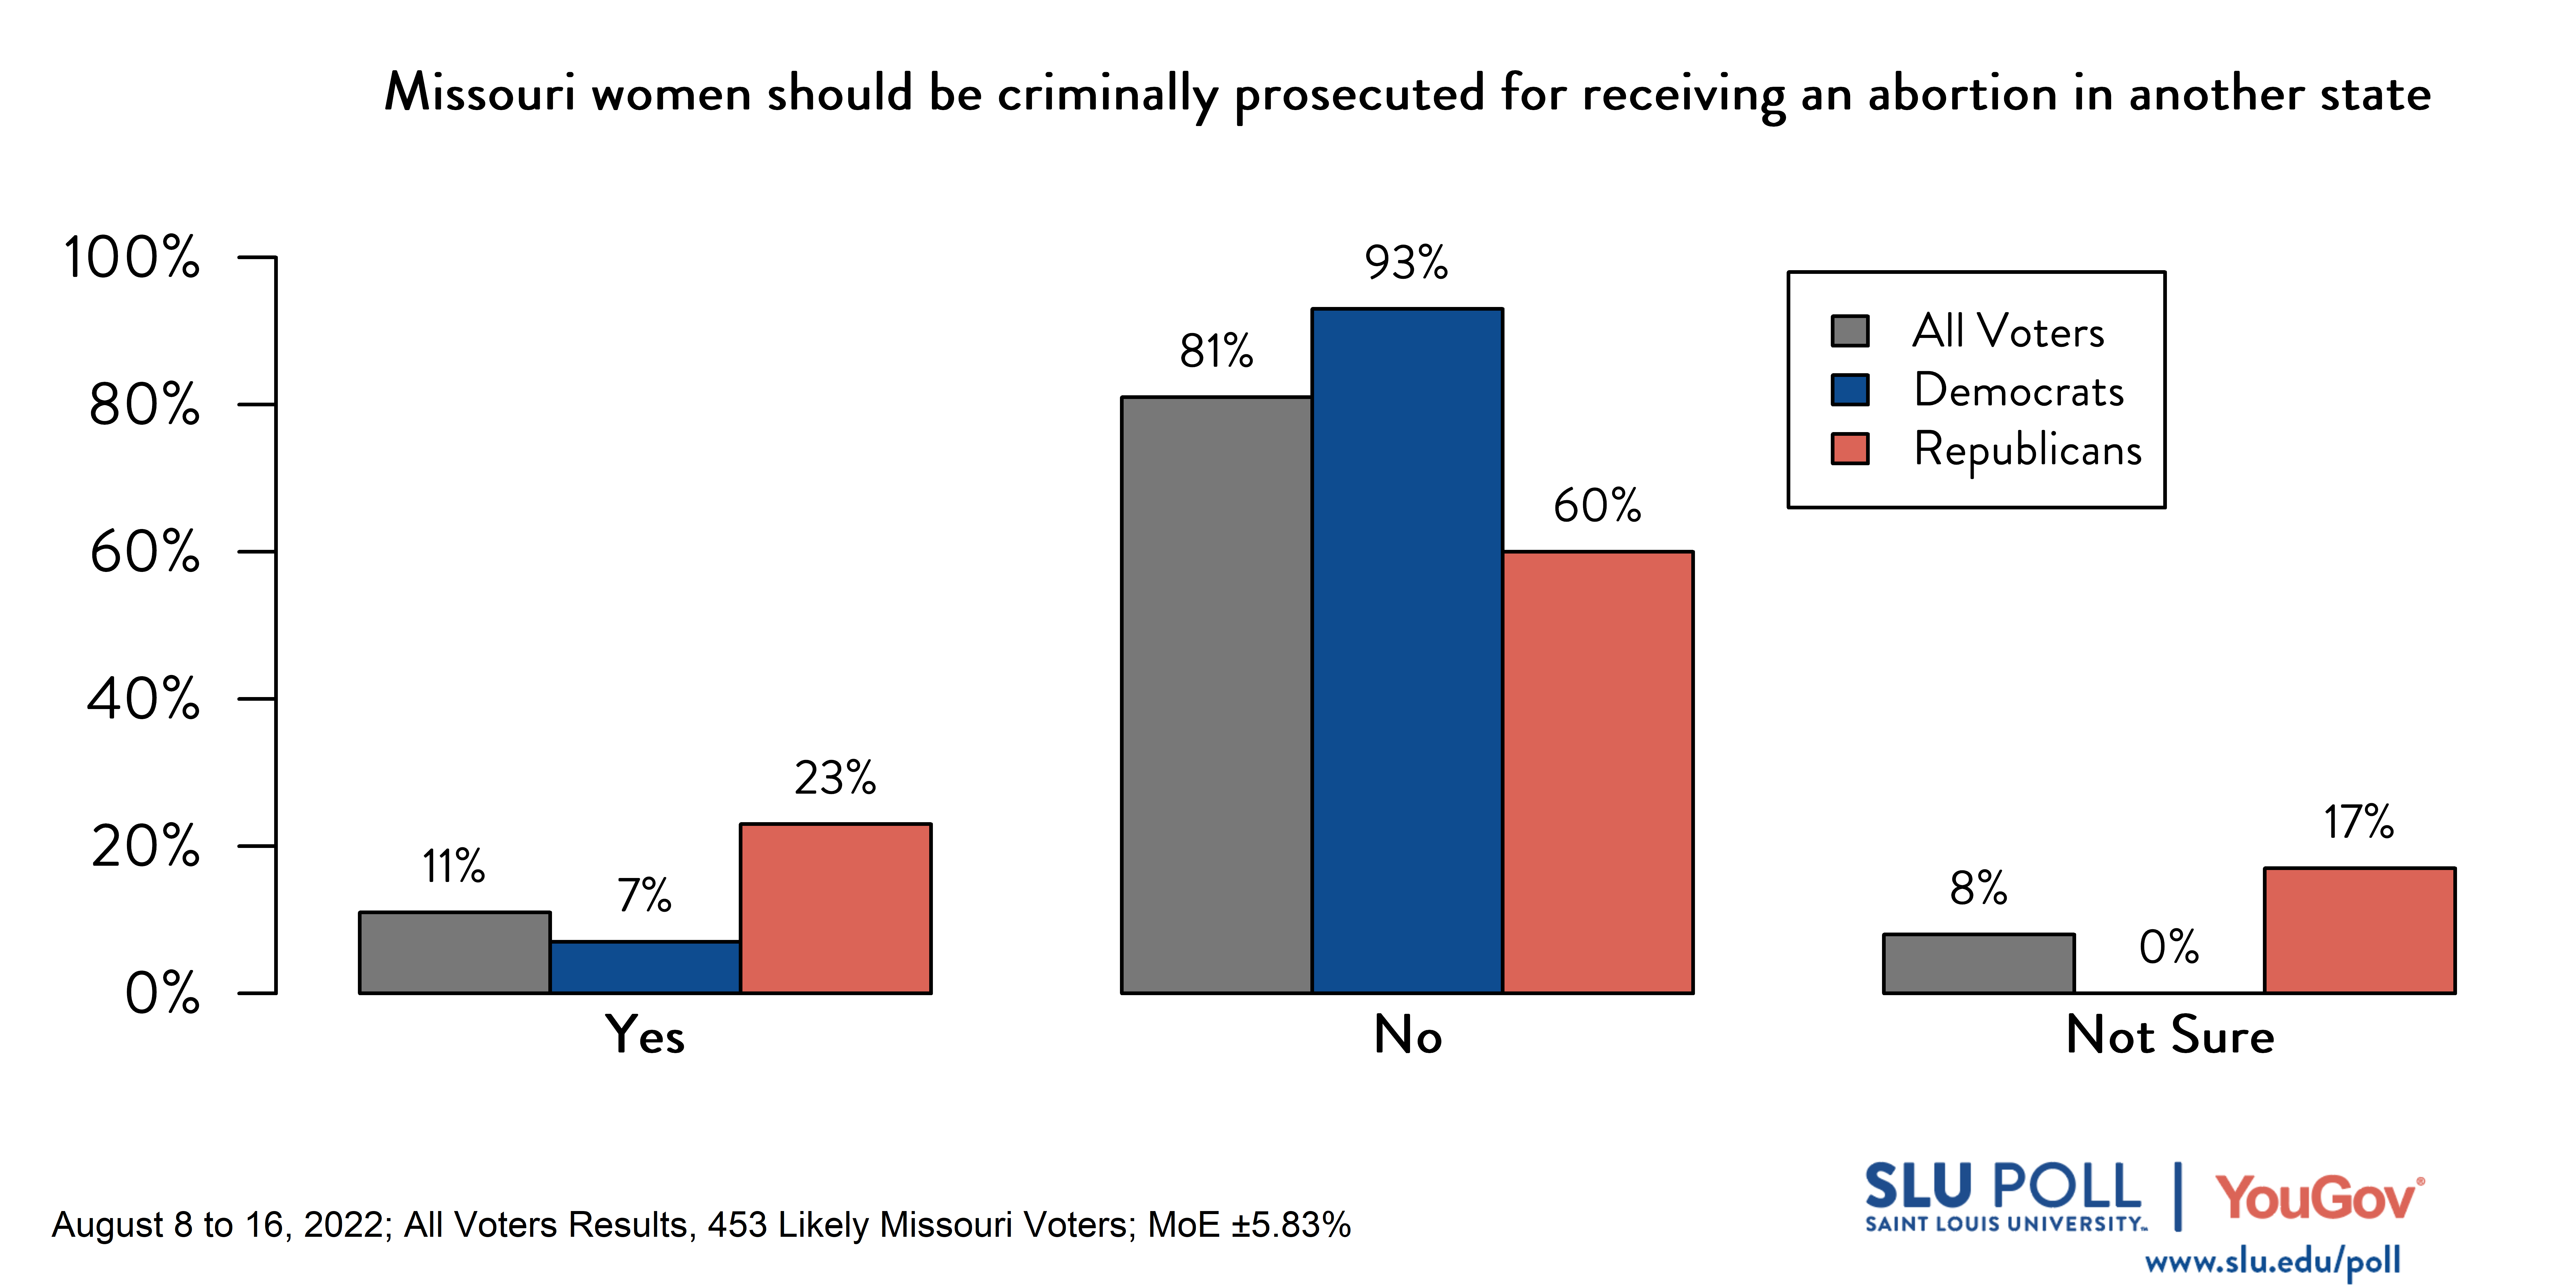 Likely voters' responses to 'Missouri Attorney General Eric Schmitt has the discretion to try to criminalize a Missouri woman going to another state to receive an abortion. Do you think a Missouri woman should be criminally prosecuted for receiving an abortion in another state? ': 11% Yes, 81% No, and 8% Not sure. Democratic voters' responses: ' 7% Yes, 93% No, and 0% Not sure. Republican voters' responses: 23% Yes, 60% No, and 17% Not sure. 